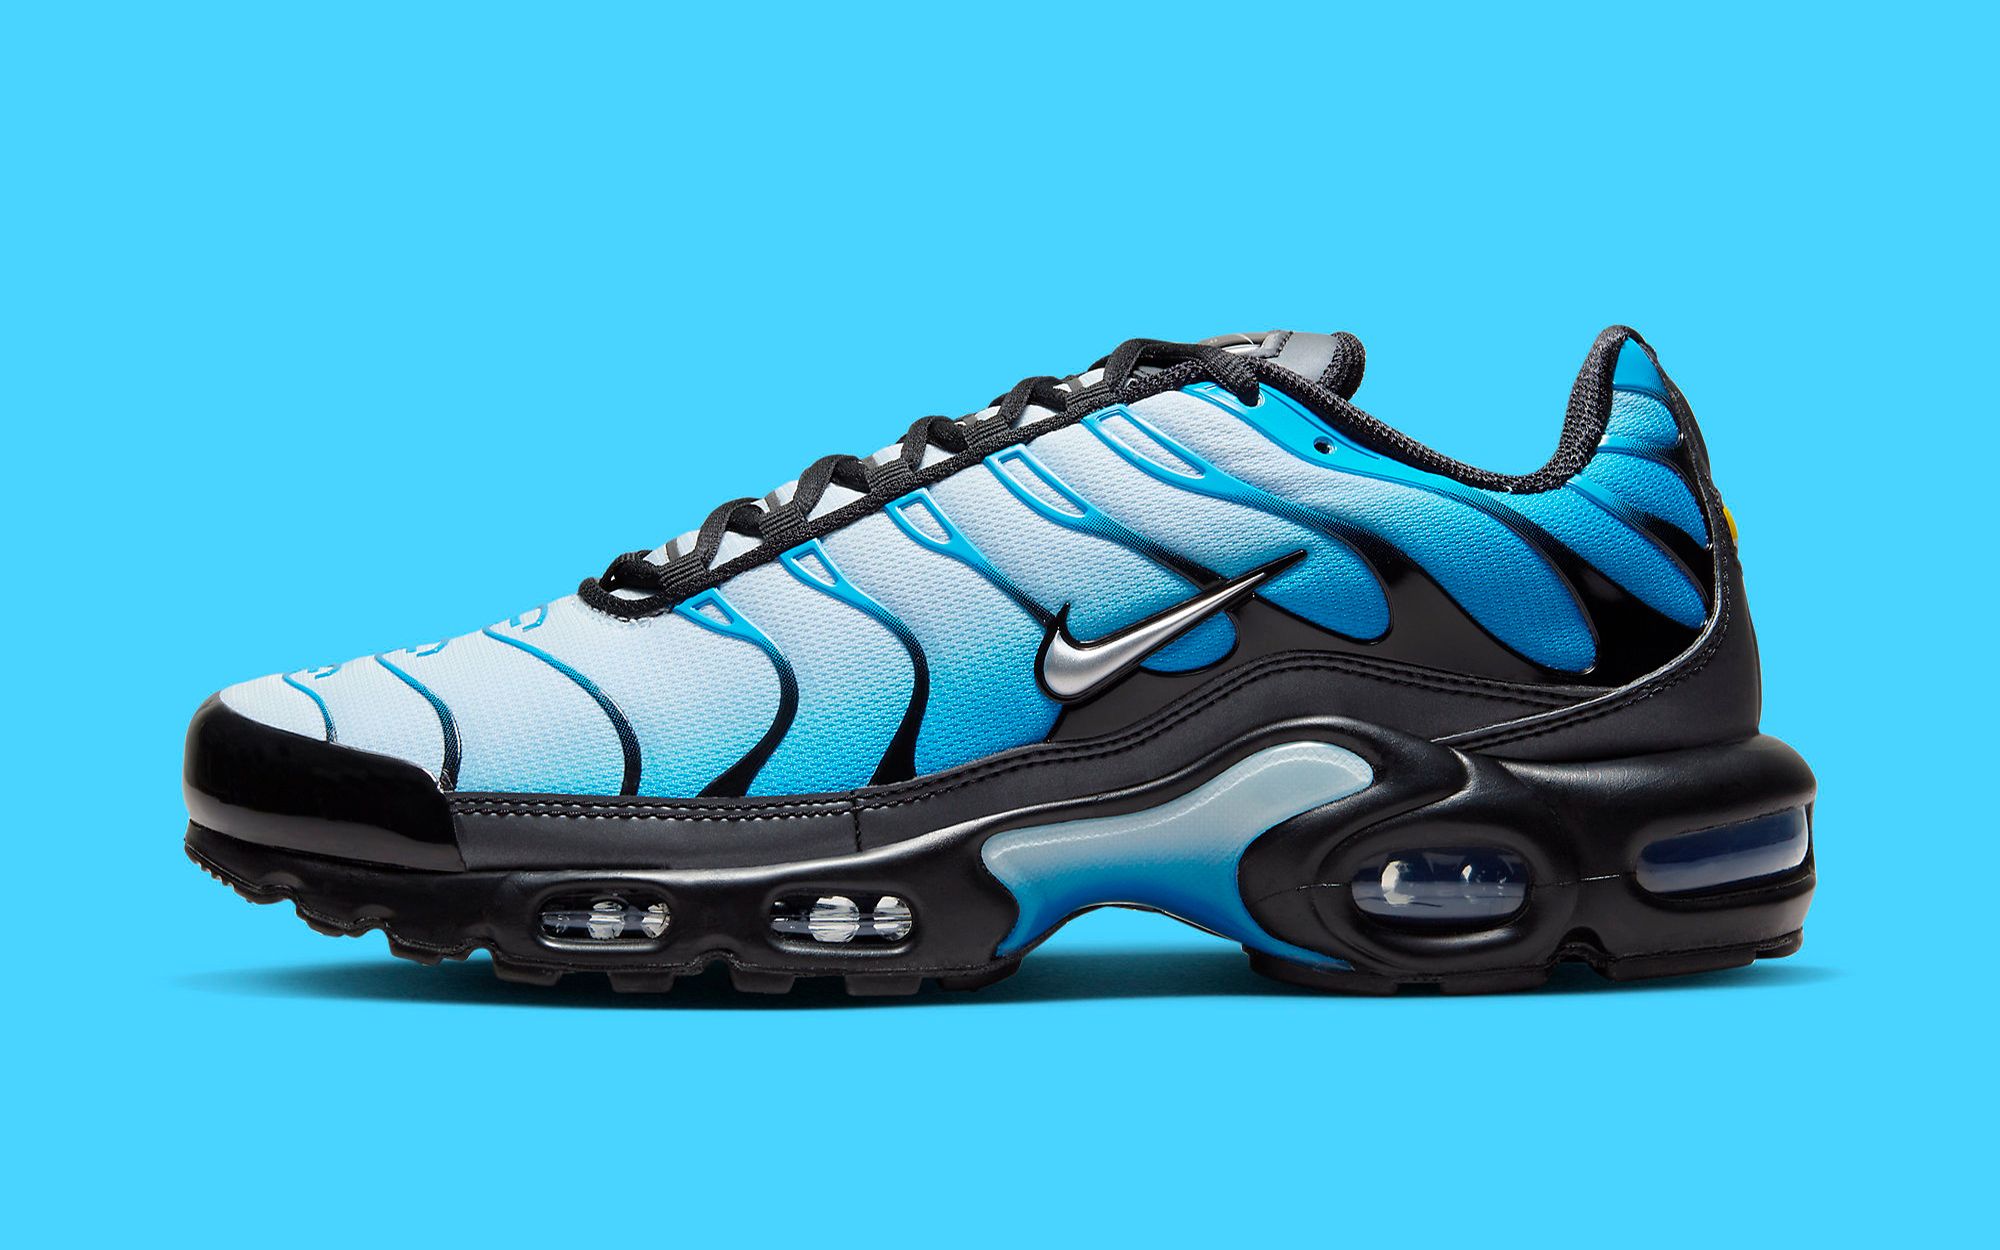 The Air Max Plus Appears in a Bright Blue and Black Arrangement ...